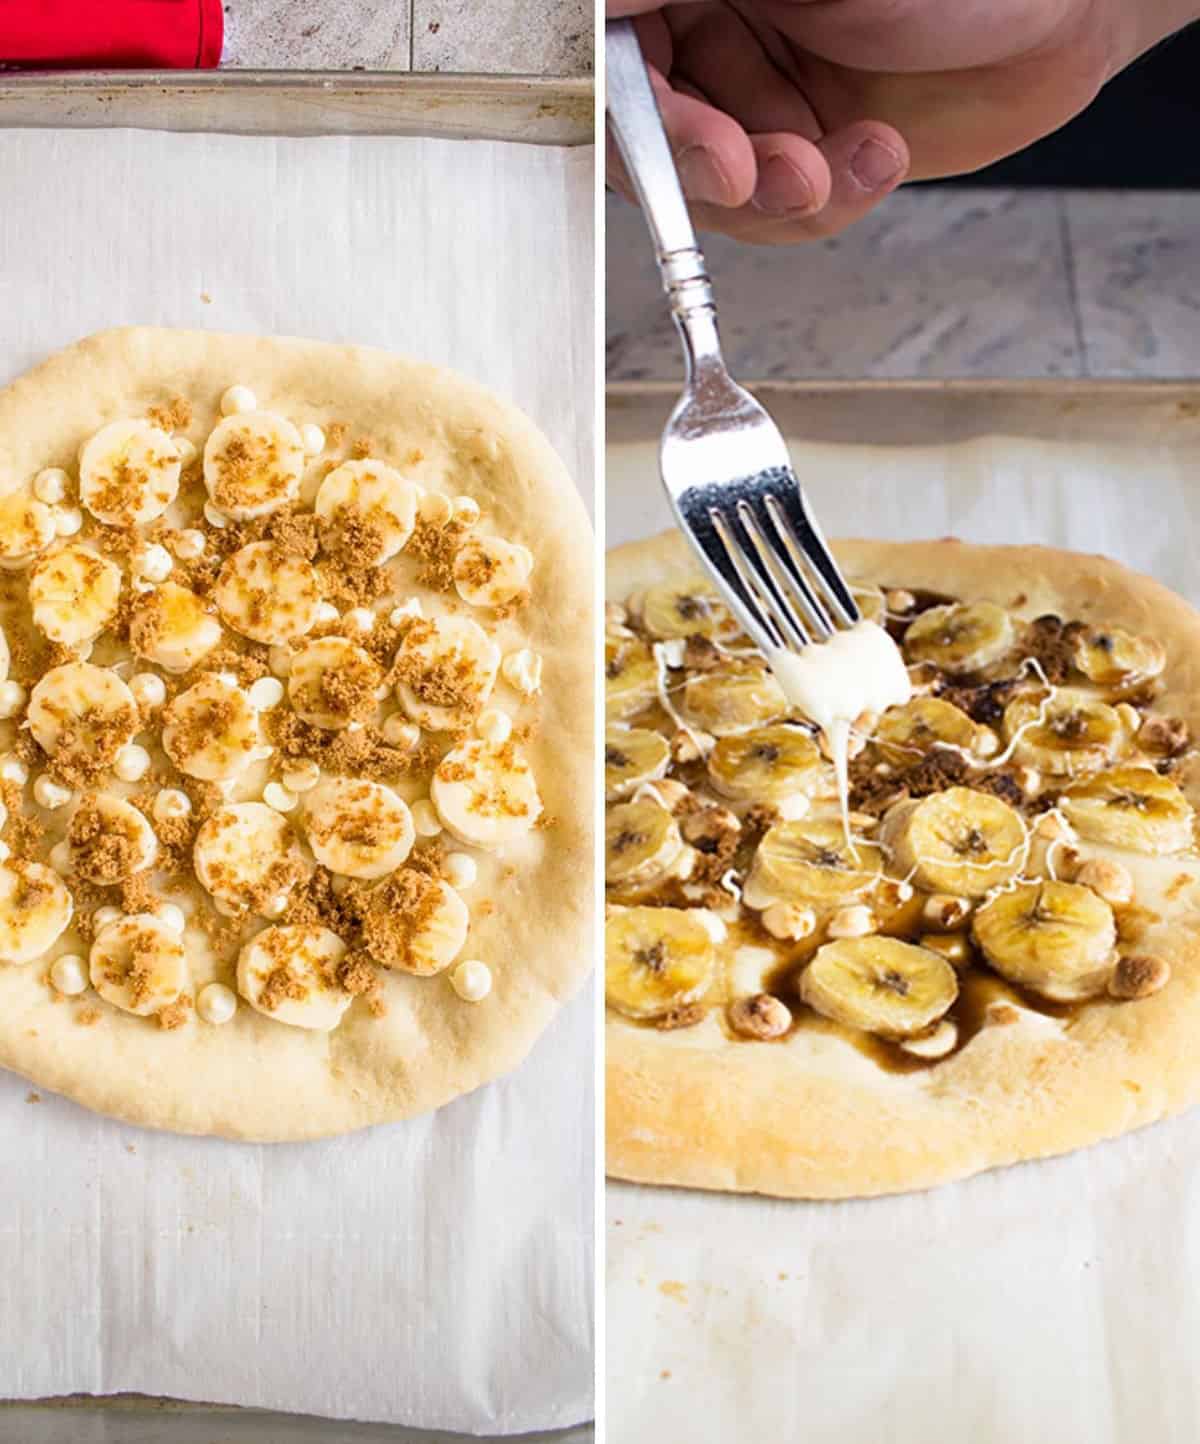 pizza dough with sliced bananas, white chocolate, brown sugar, drizzling white chocolate on top